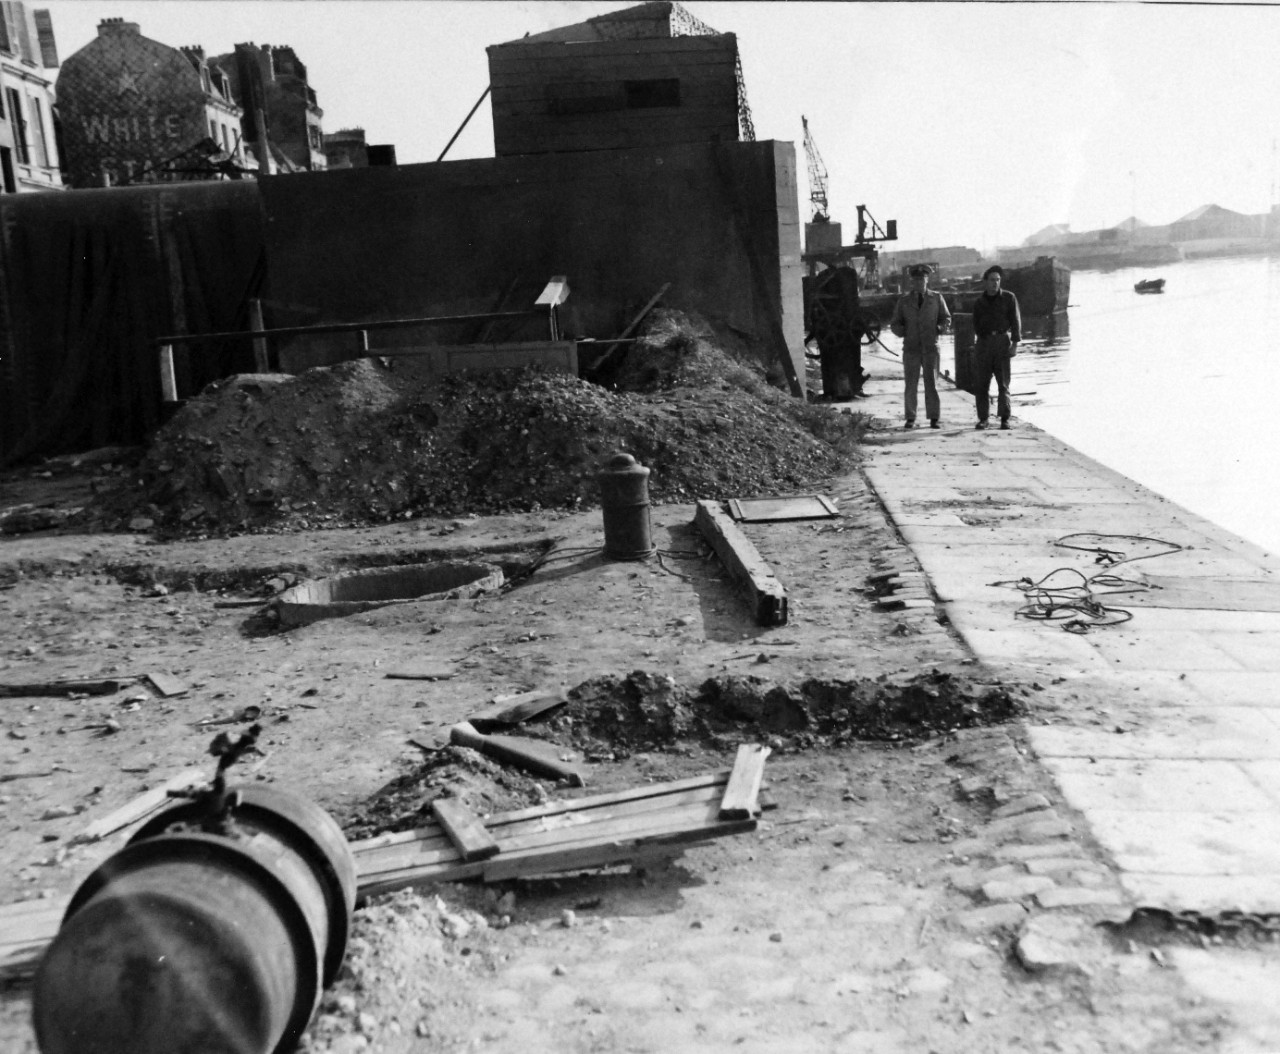 80-G-257400:  Invasion of France, Le Havre, August-September 1944.   Prior to abandoning Le Havre, France, Germans placed demolition charge in well-like hole to destroy part of sea wall to render it useless to Allies.  Tank in foreground is a smokepot that Germans set off to cover harbor areas when Allied planes come over, 28 September 1944.  Official U.S. Navy Photograph, now in the collection of the National Archives.   (2014/10/28).  